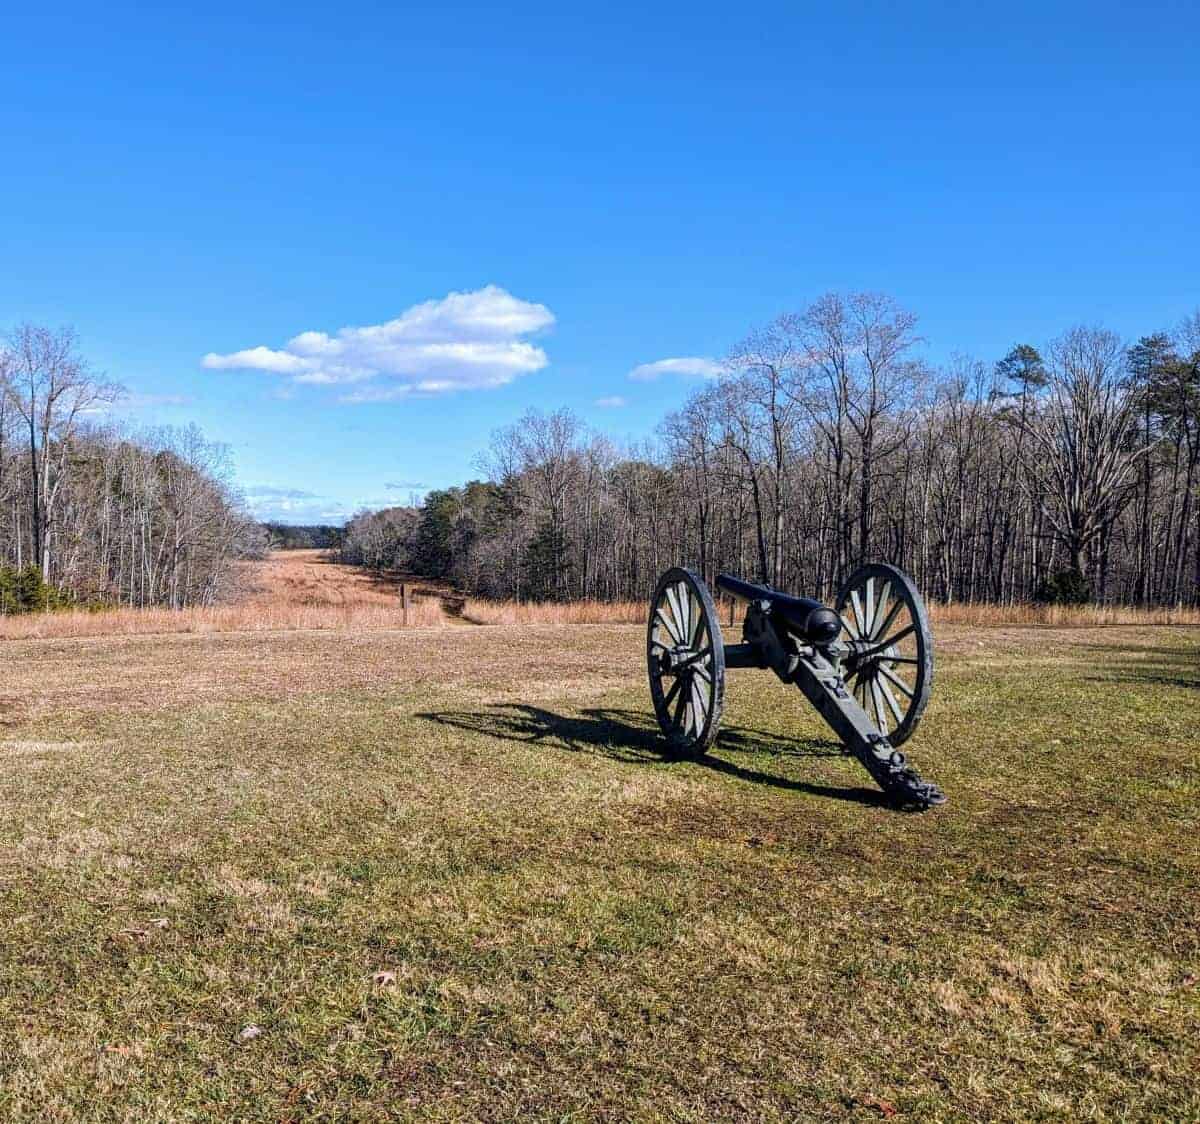 Old Civil War artillery piece sitting on a hill in a field. There is a blue sky. Many of the trees around are without leaves because it is a cold but sunny winter day.